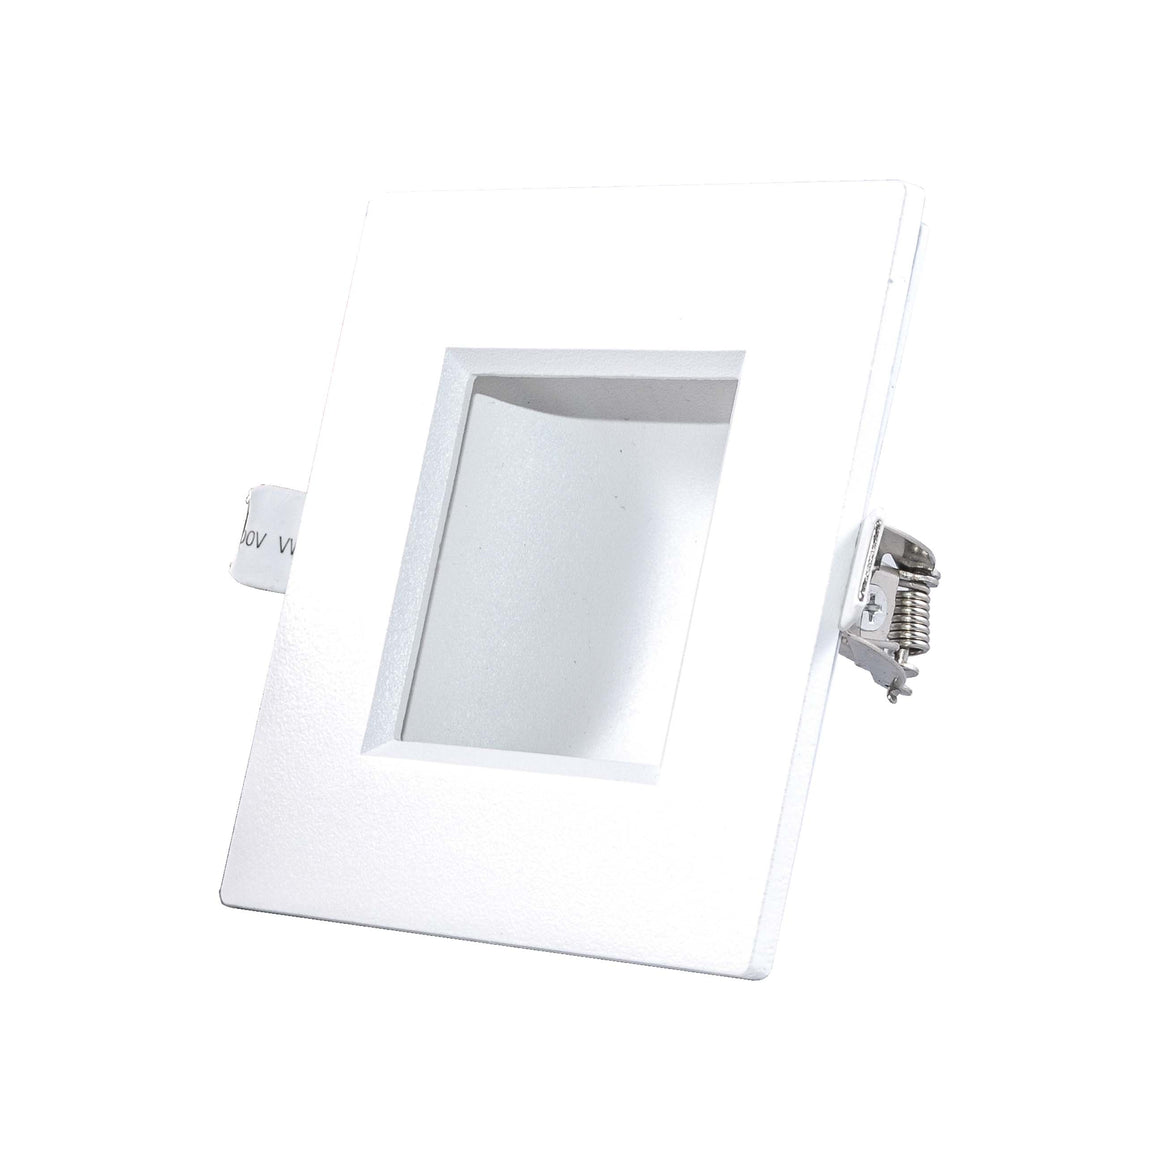 ZLN-SDL08 Dimmable